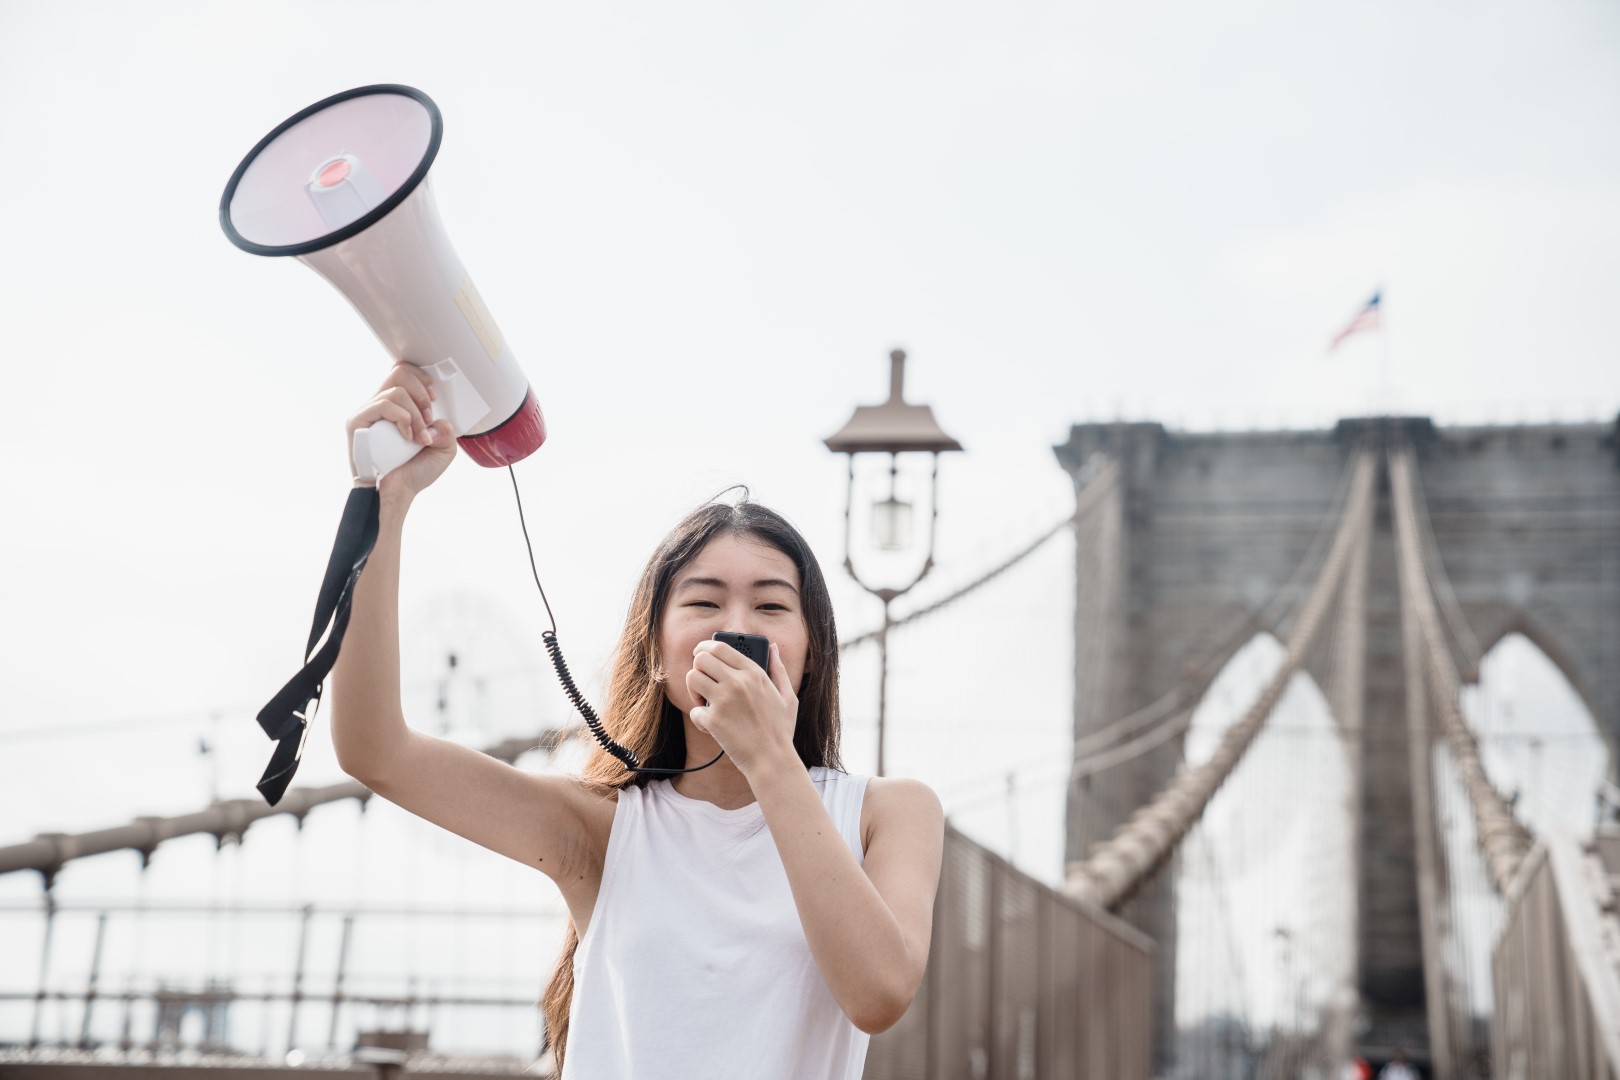 A woman holding up a megaphone while standing on the side of a bridge.